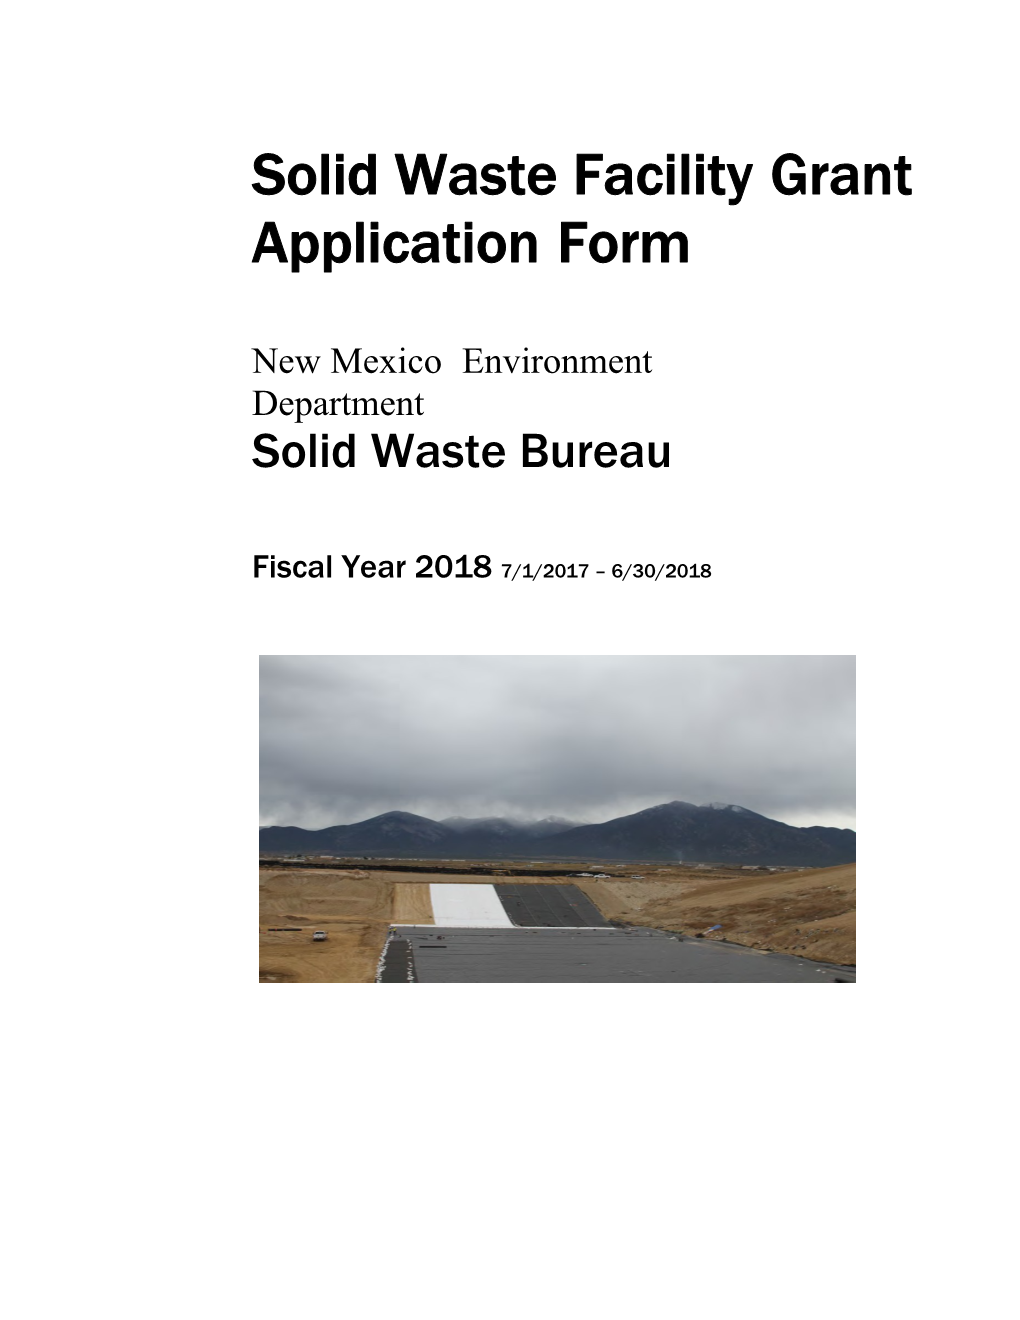 Solid Waste Facility Grant Application Form